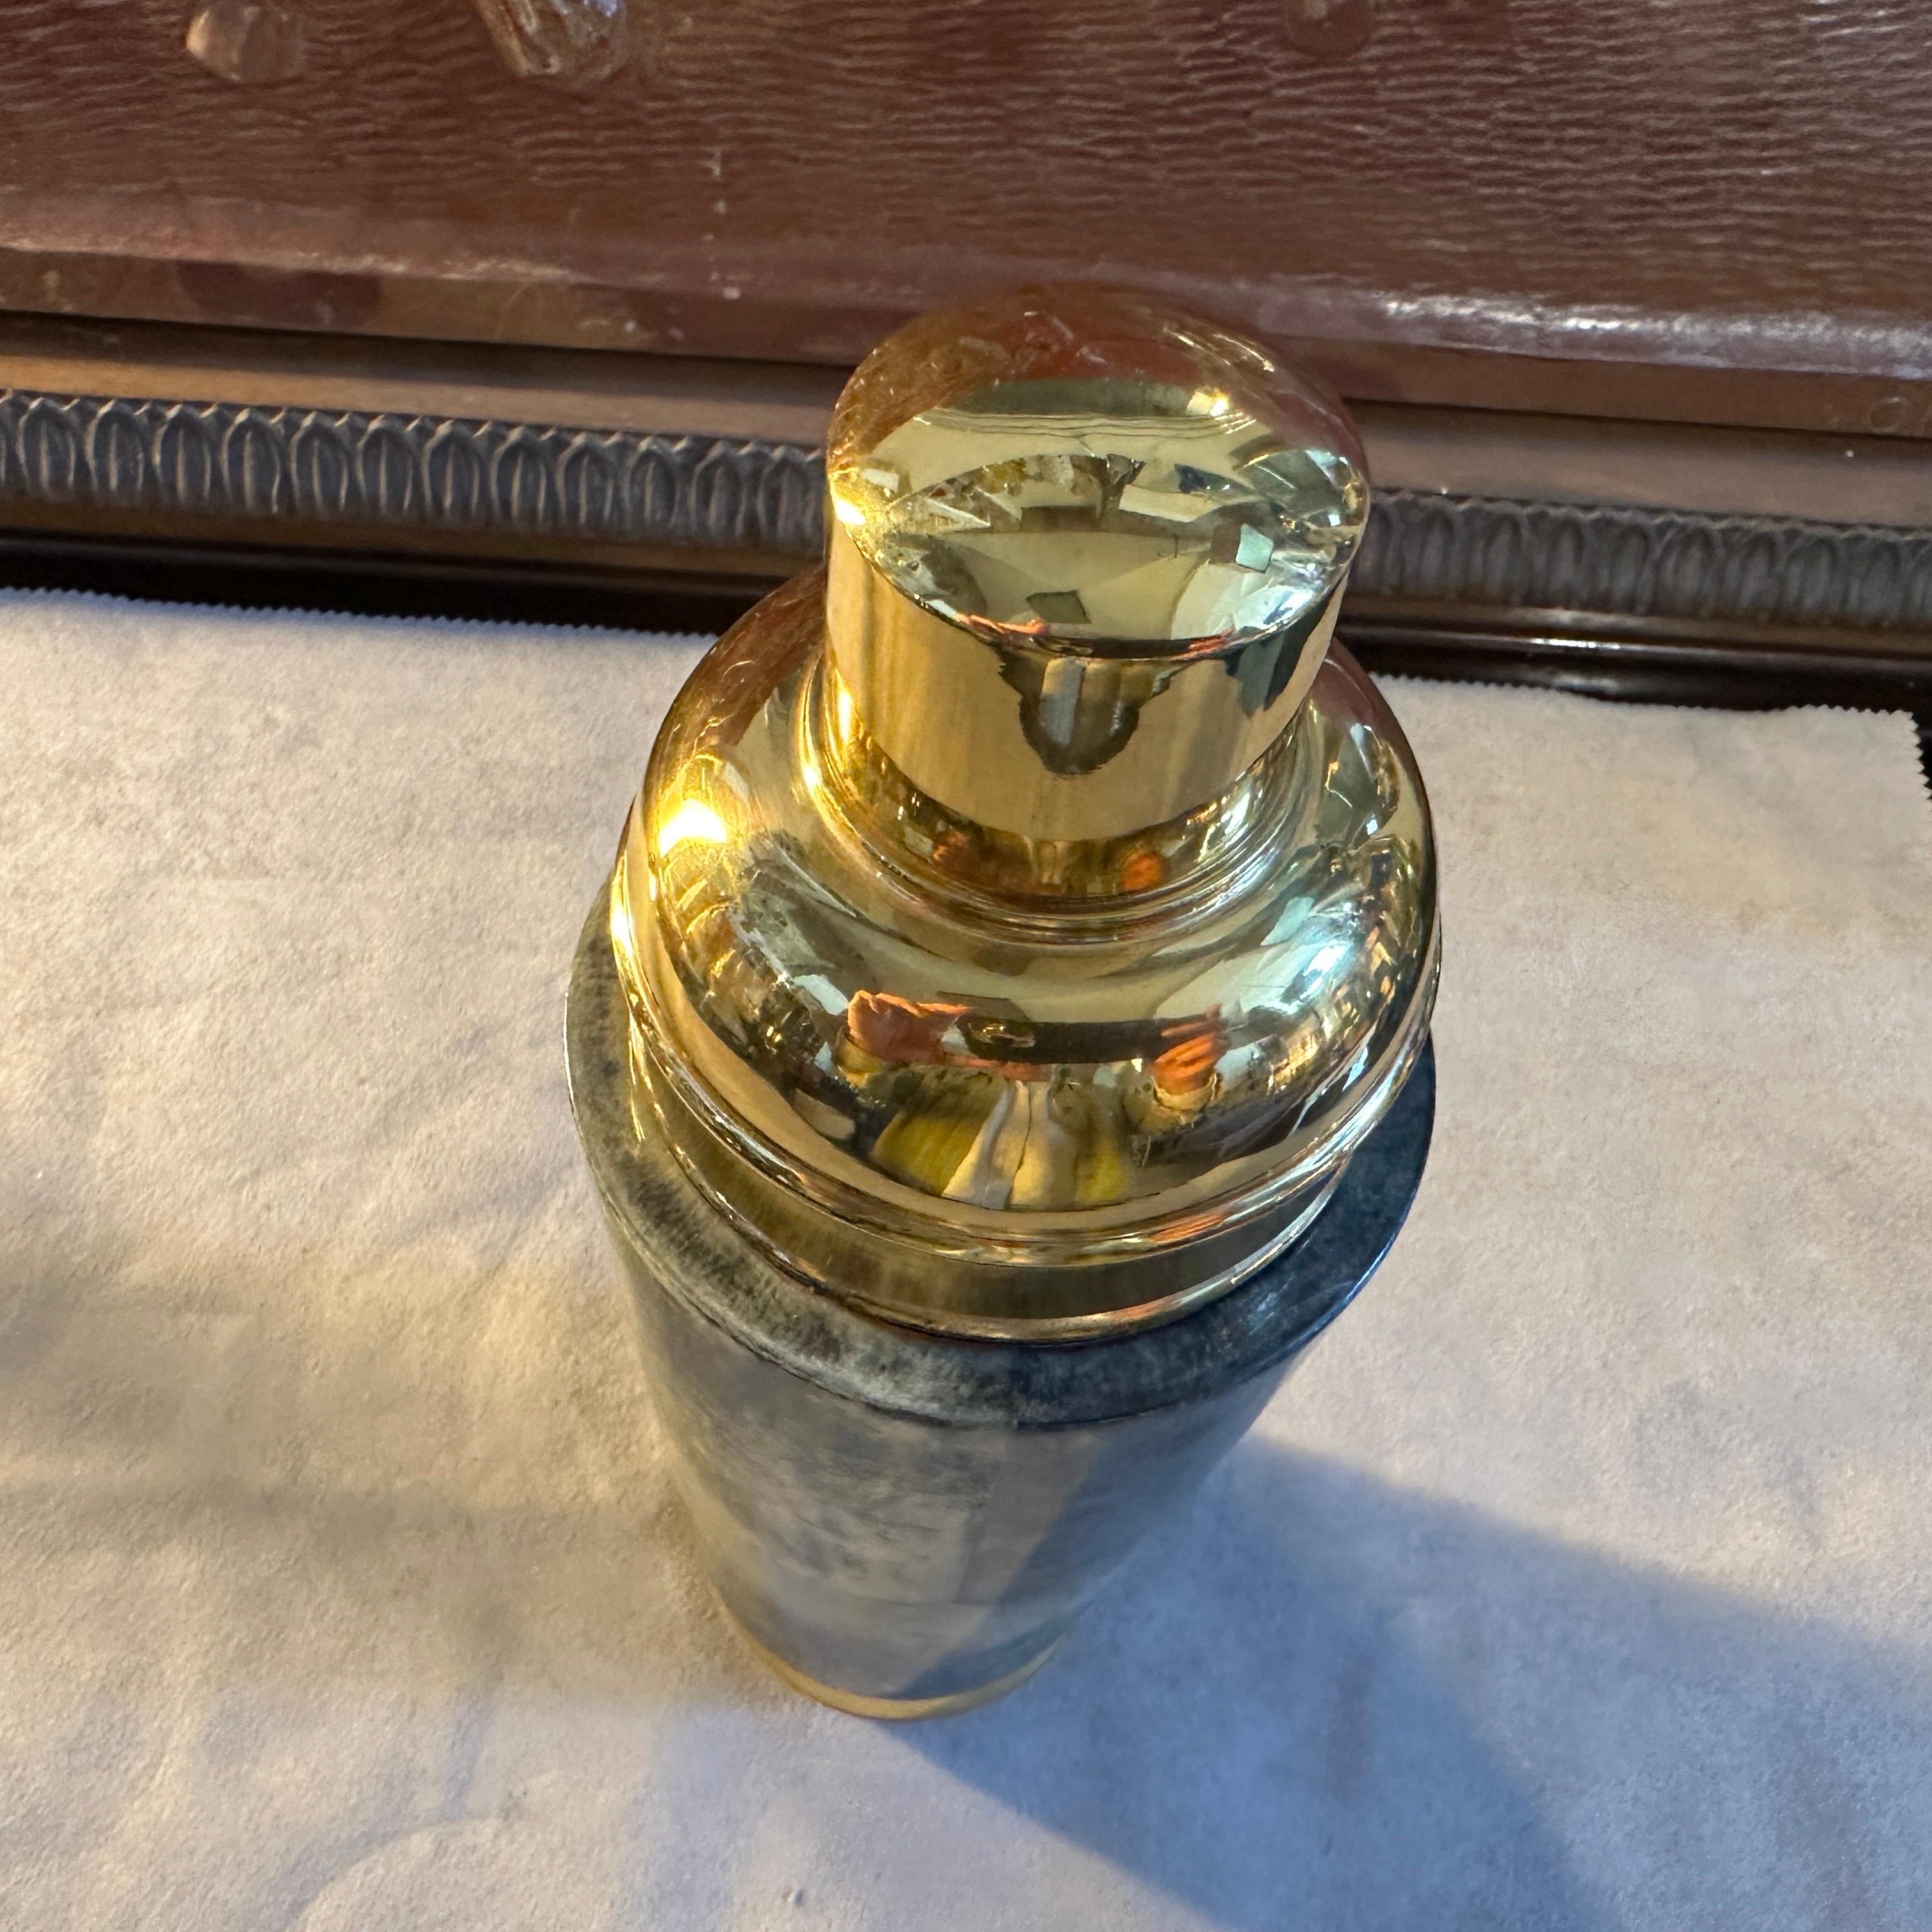 1950s Mid-Century Modern Brass and Green Goatskin Cocktail Shaker by Aldo Tura For Sale 5